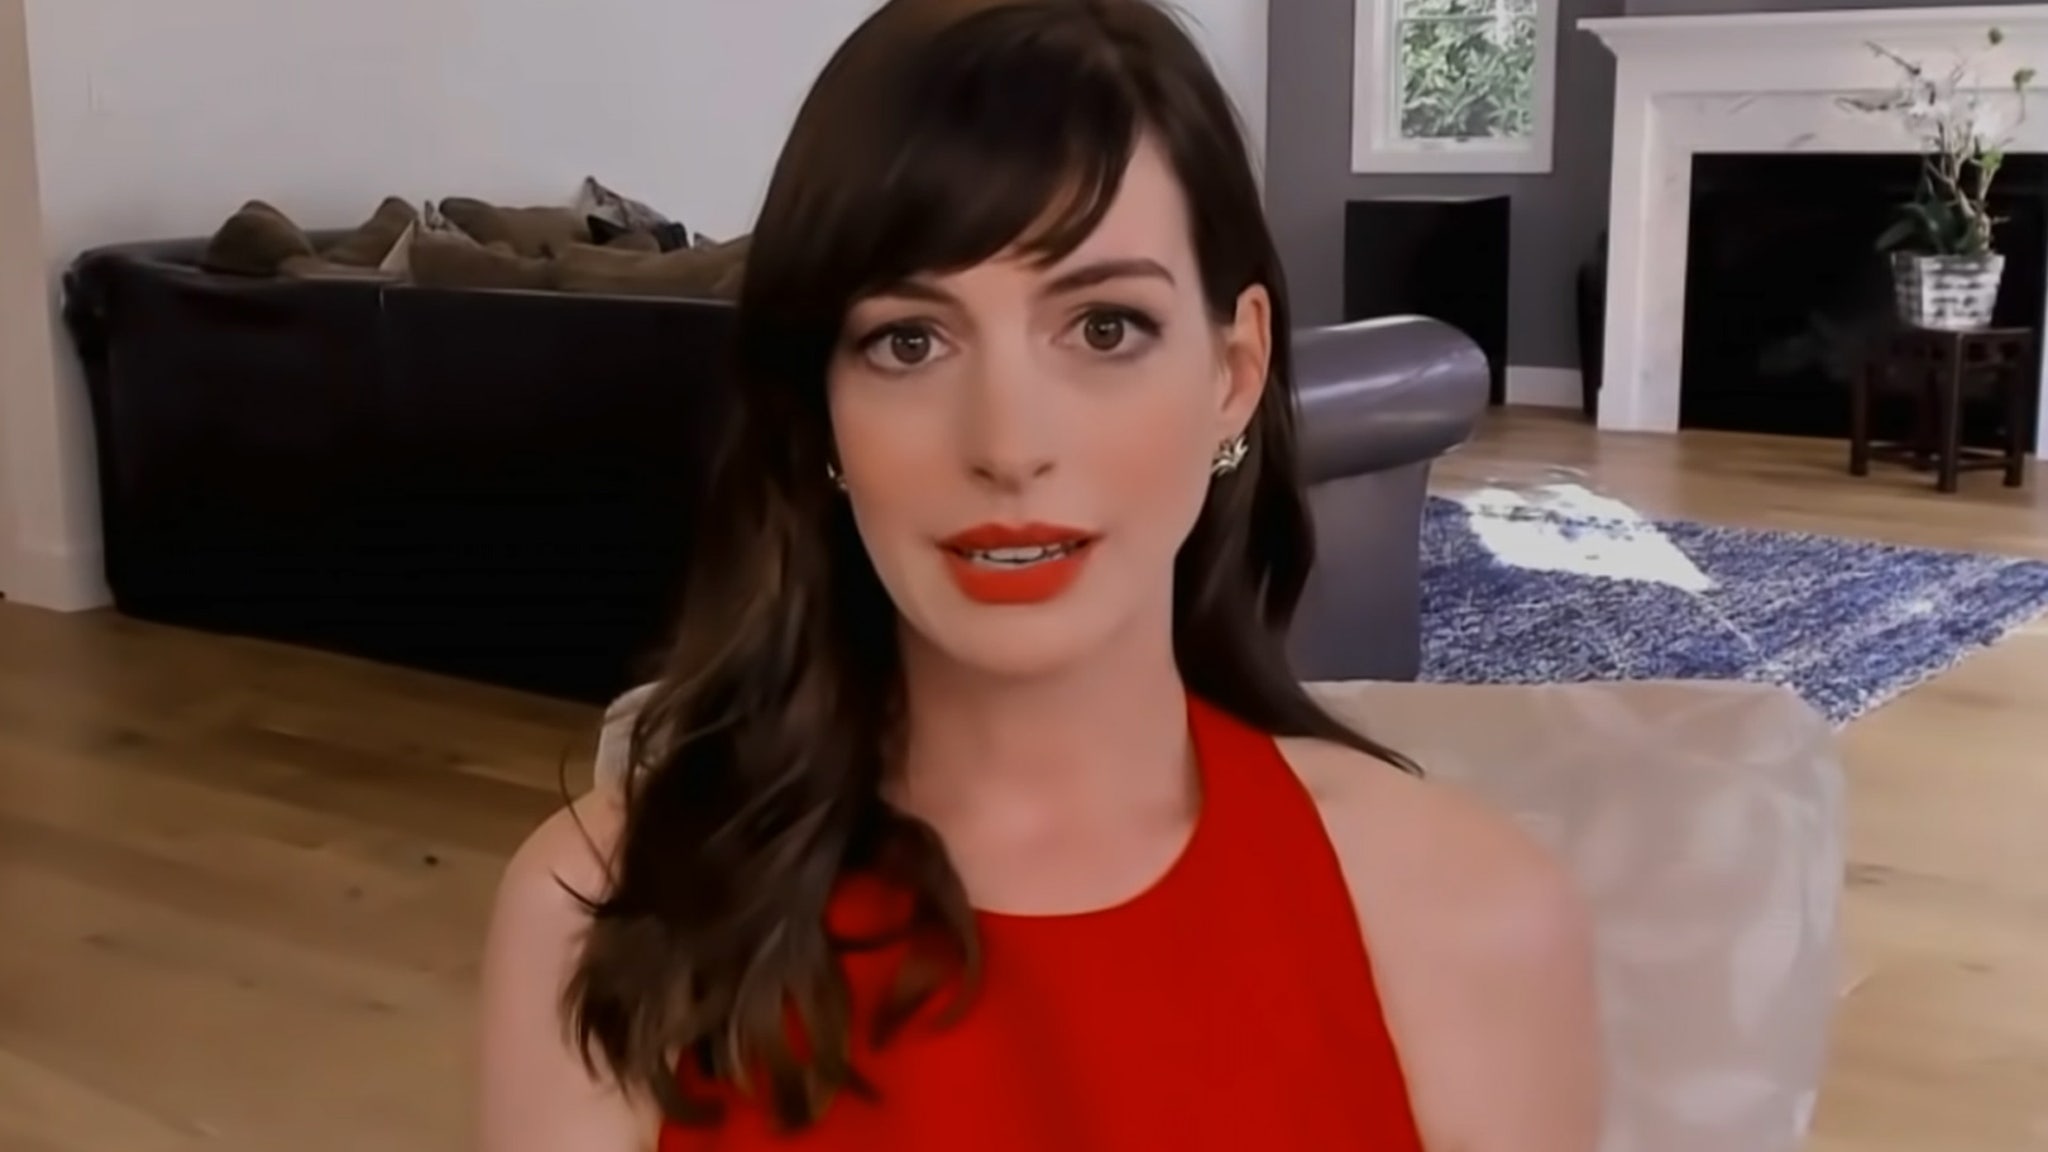 Anne Hathaway wants to be called by a different name